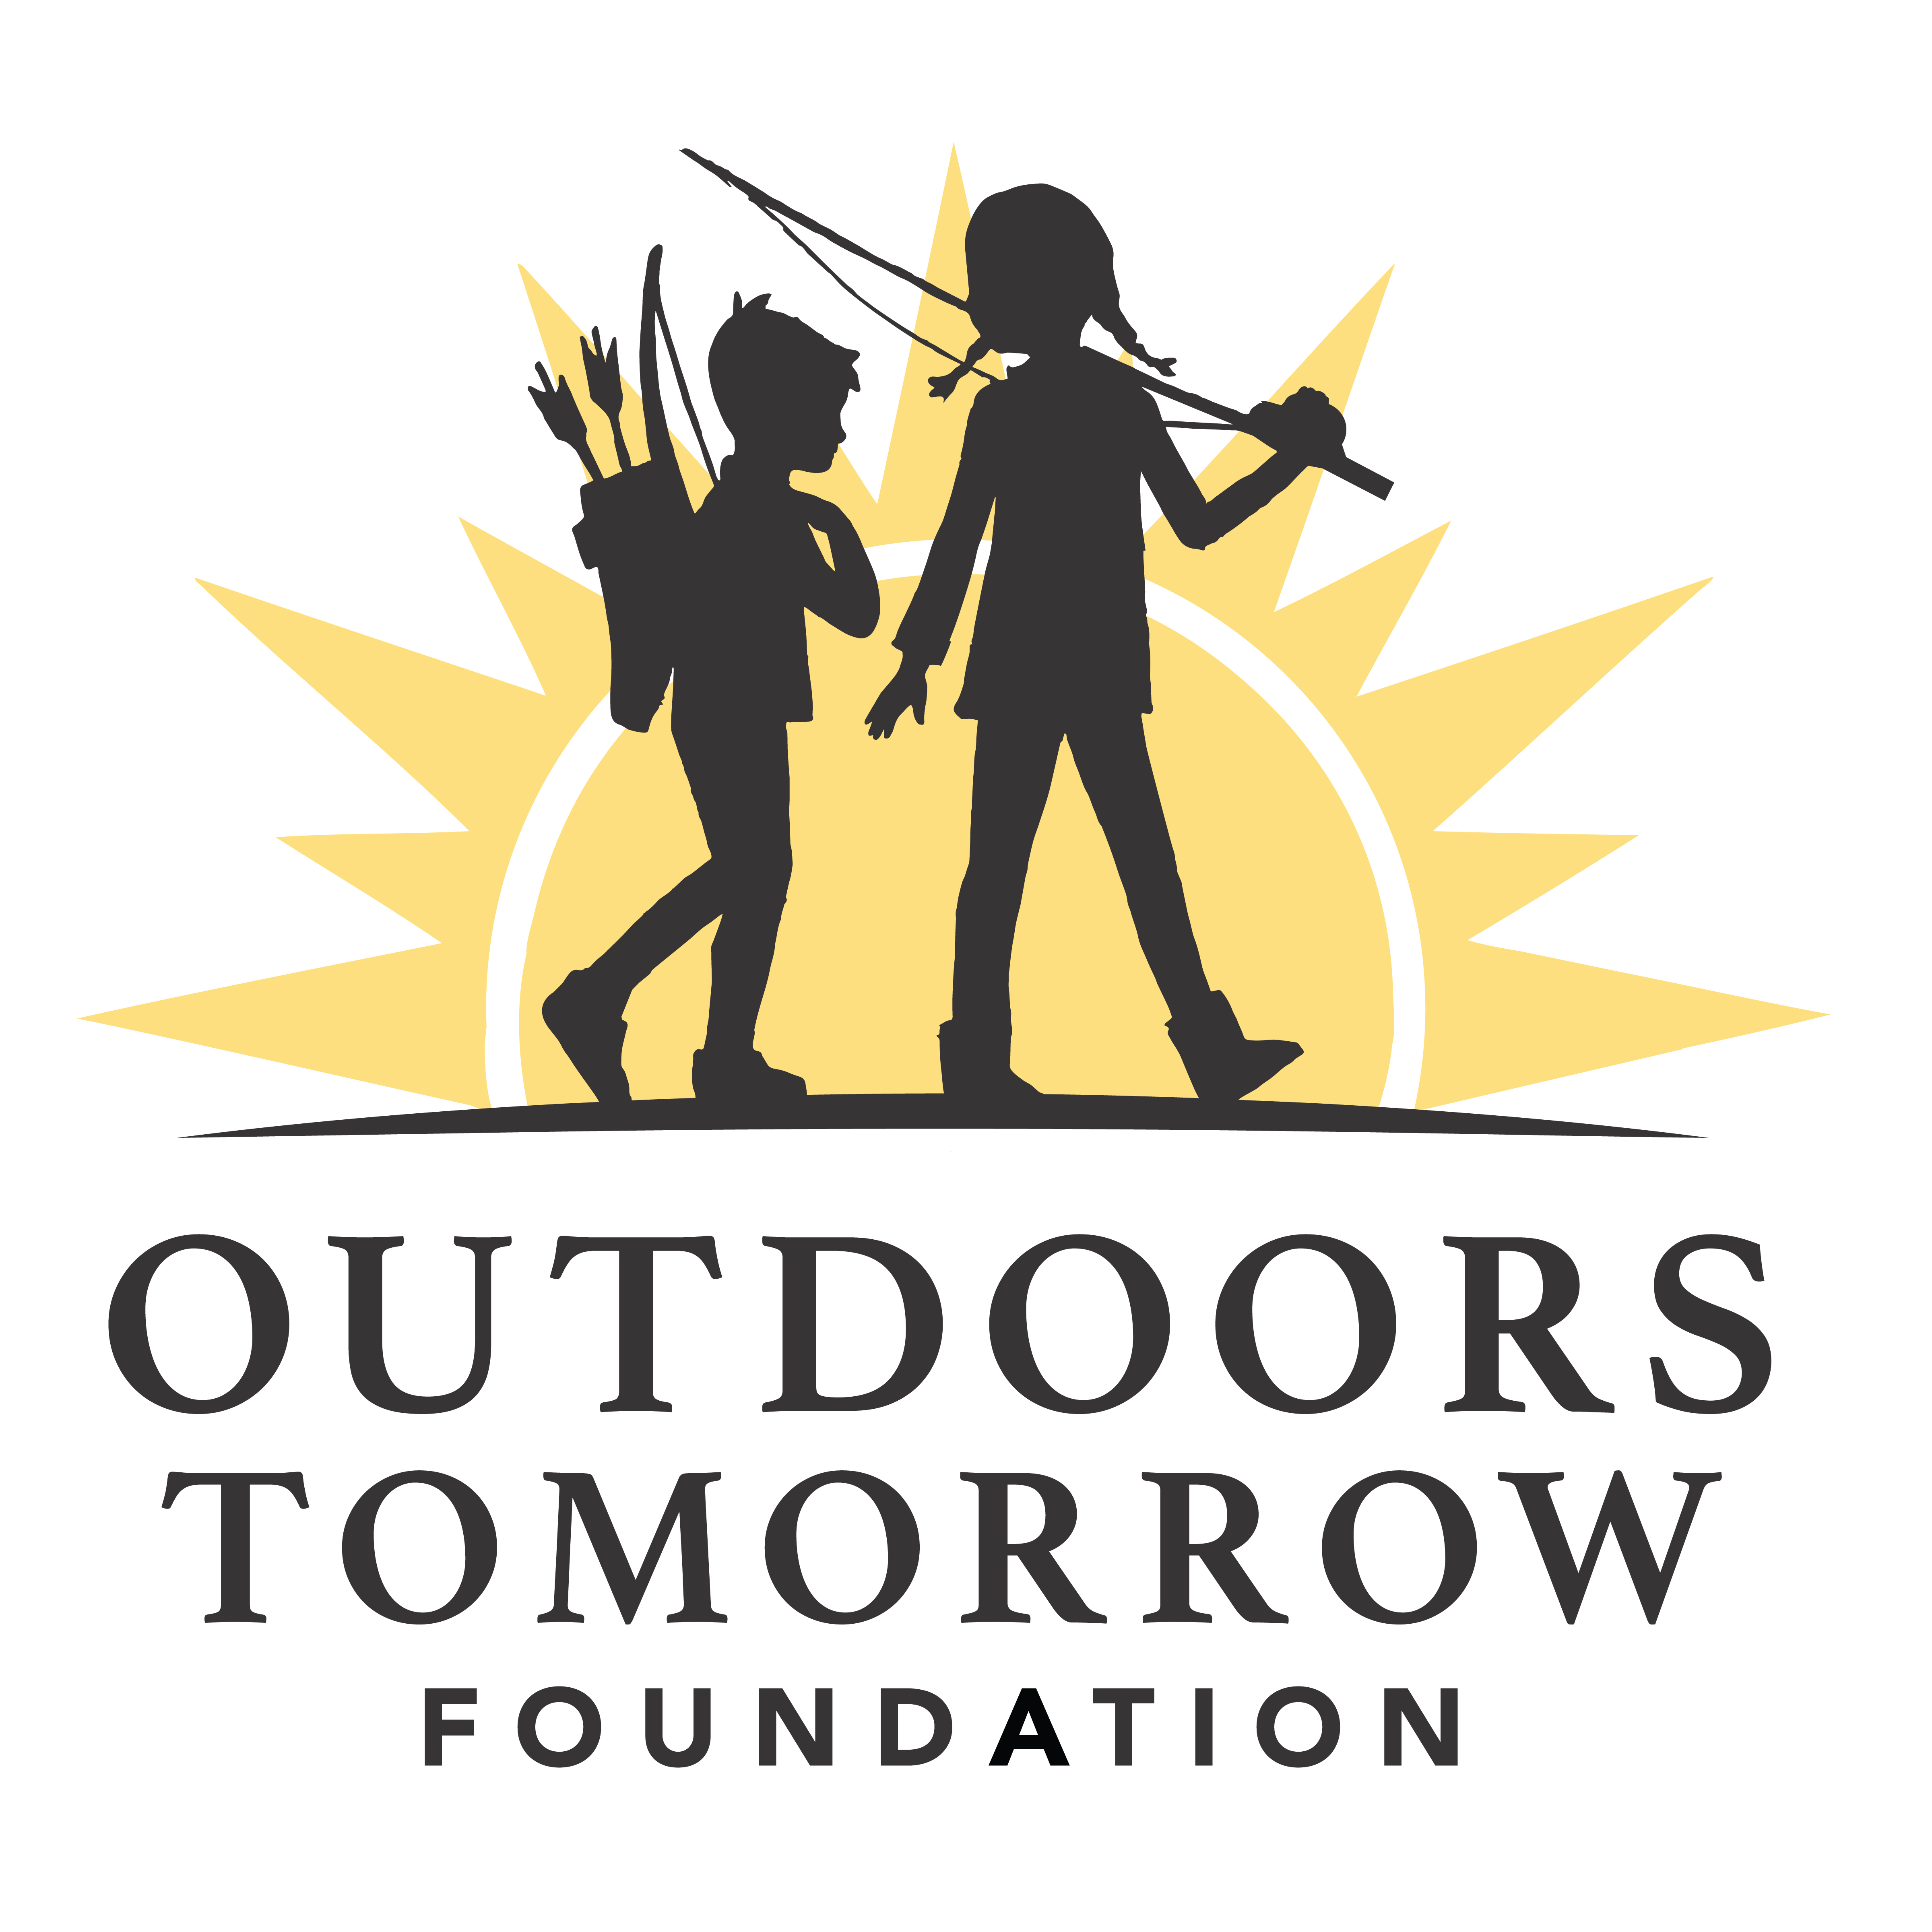 ADVANCE FINANCIAL FOUNDATION COMMITS $10K FOR OUTDOORS TOMORROW FOUNDATION’S OUTDOOR ADVENTURES PROGRAM IN NASHVILLE SCHOOLS